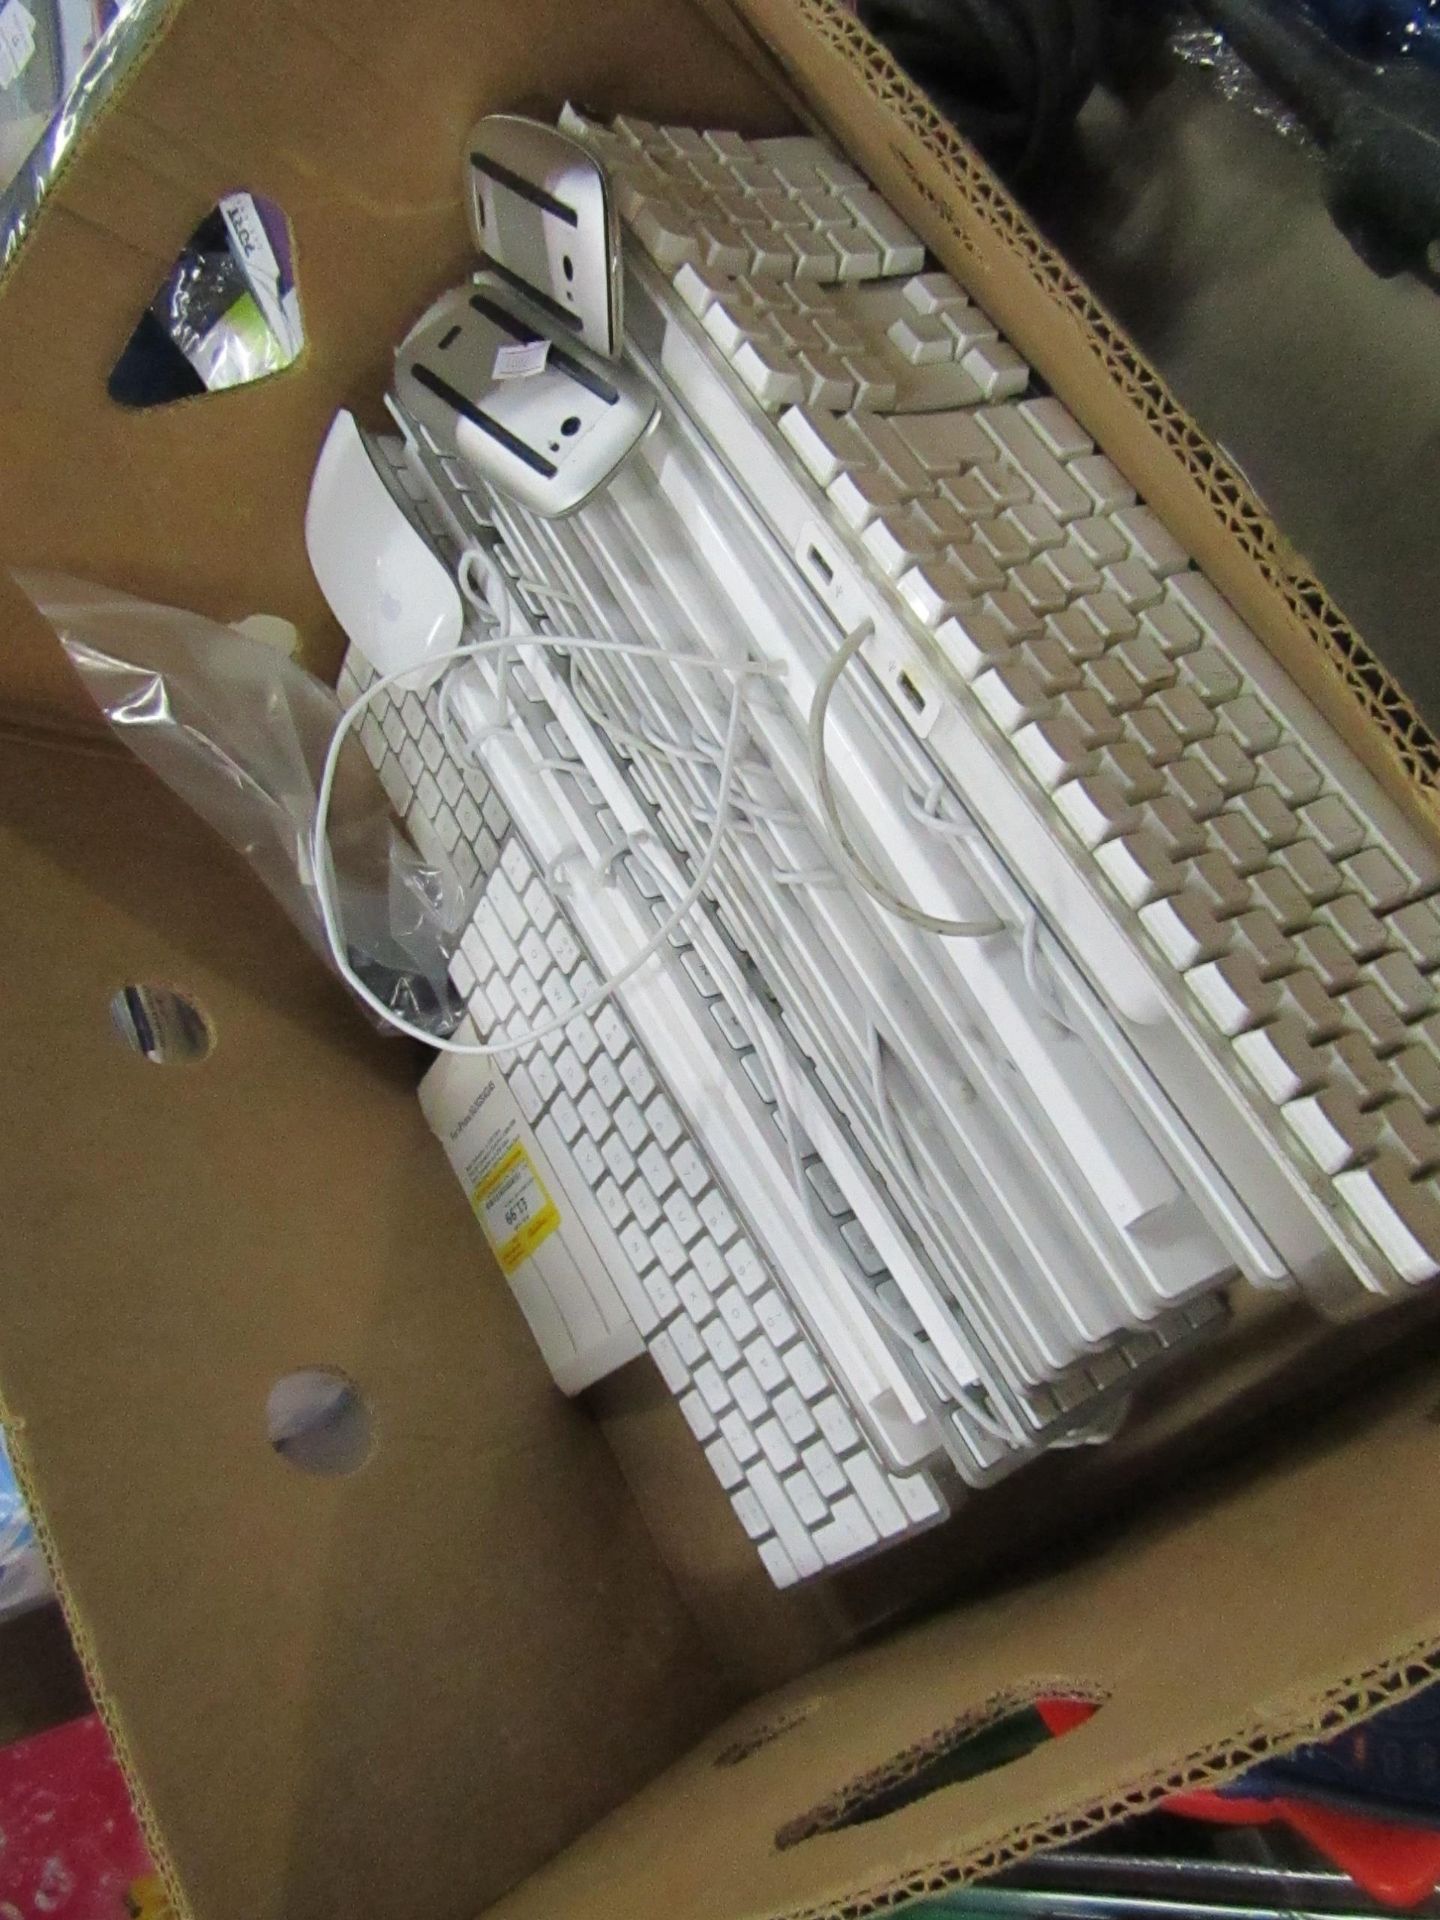 Approx 15x various Apple keyboards and mouses, all untested.